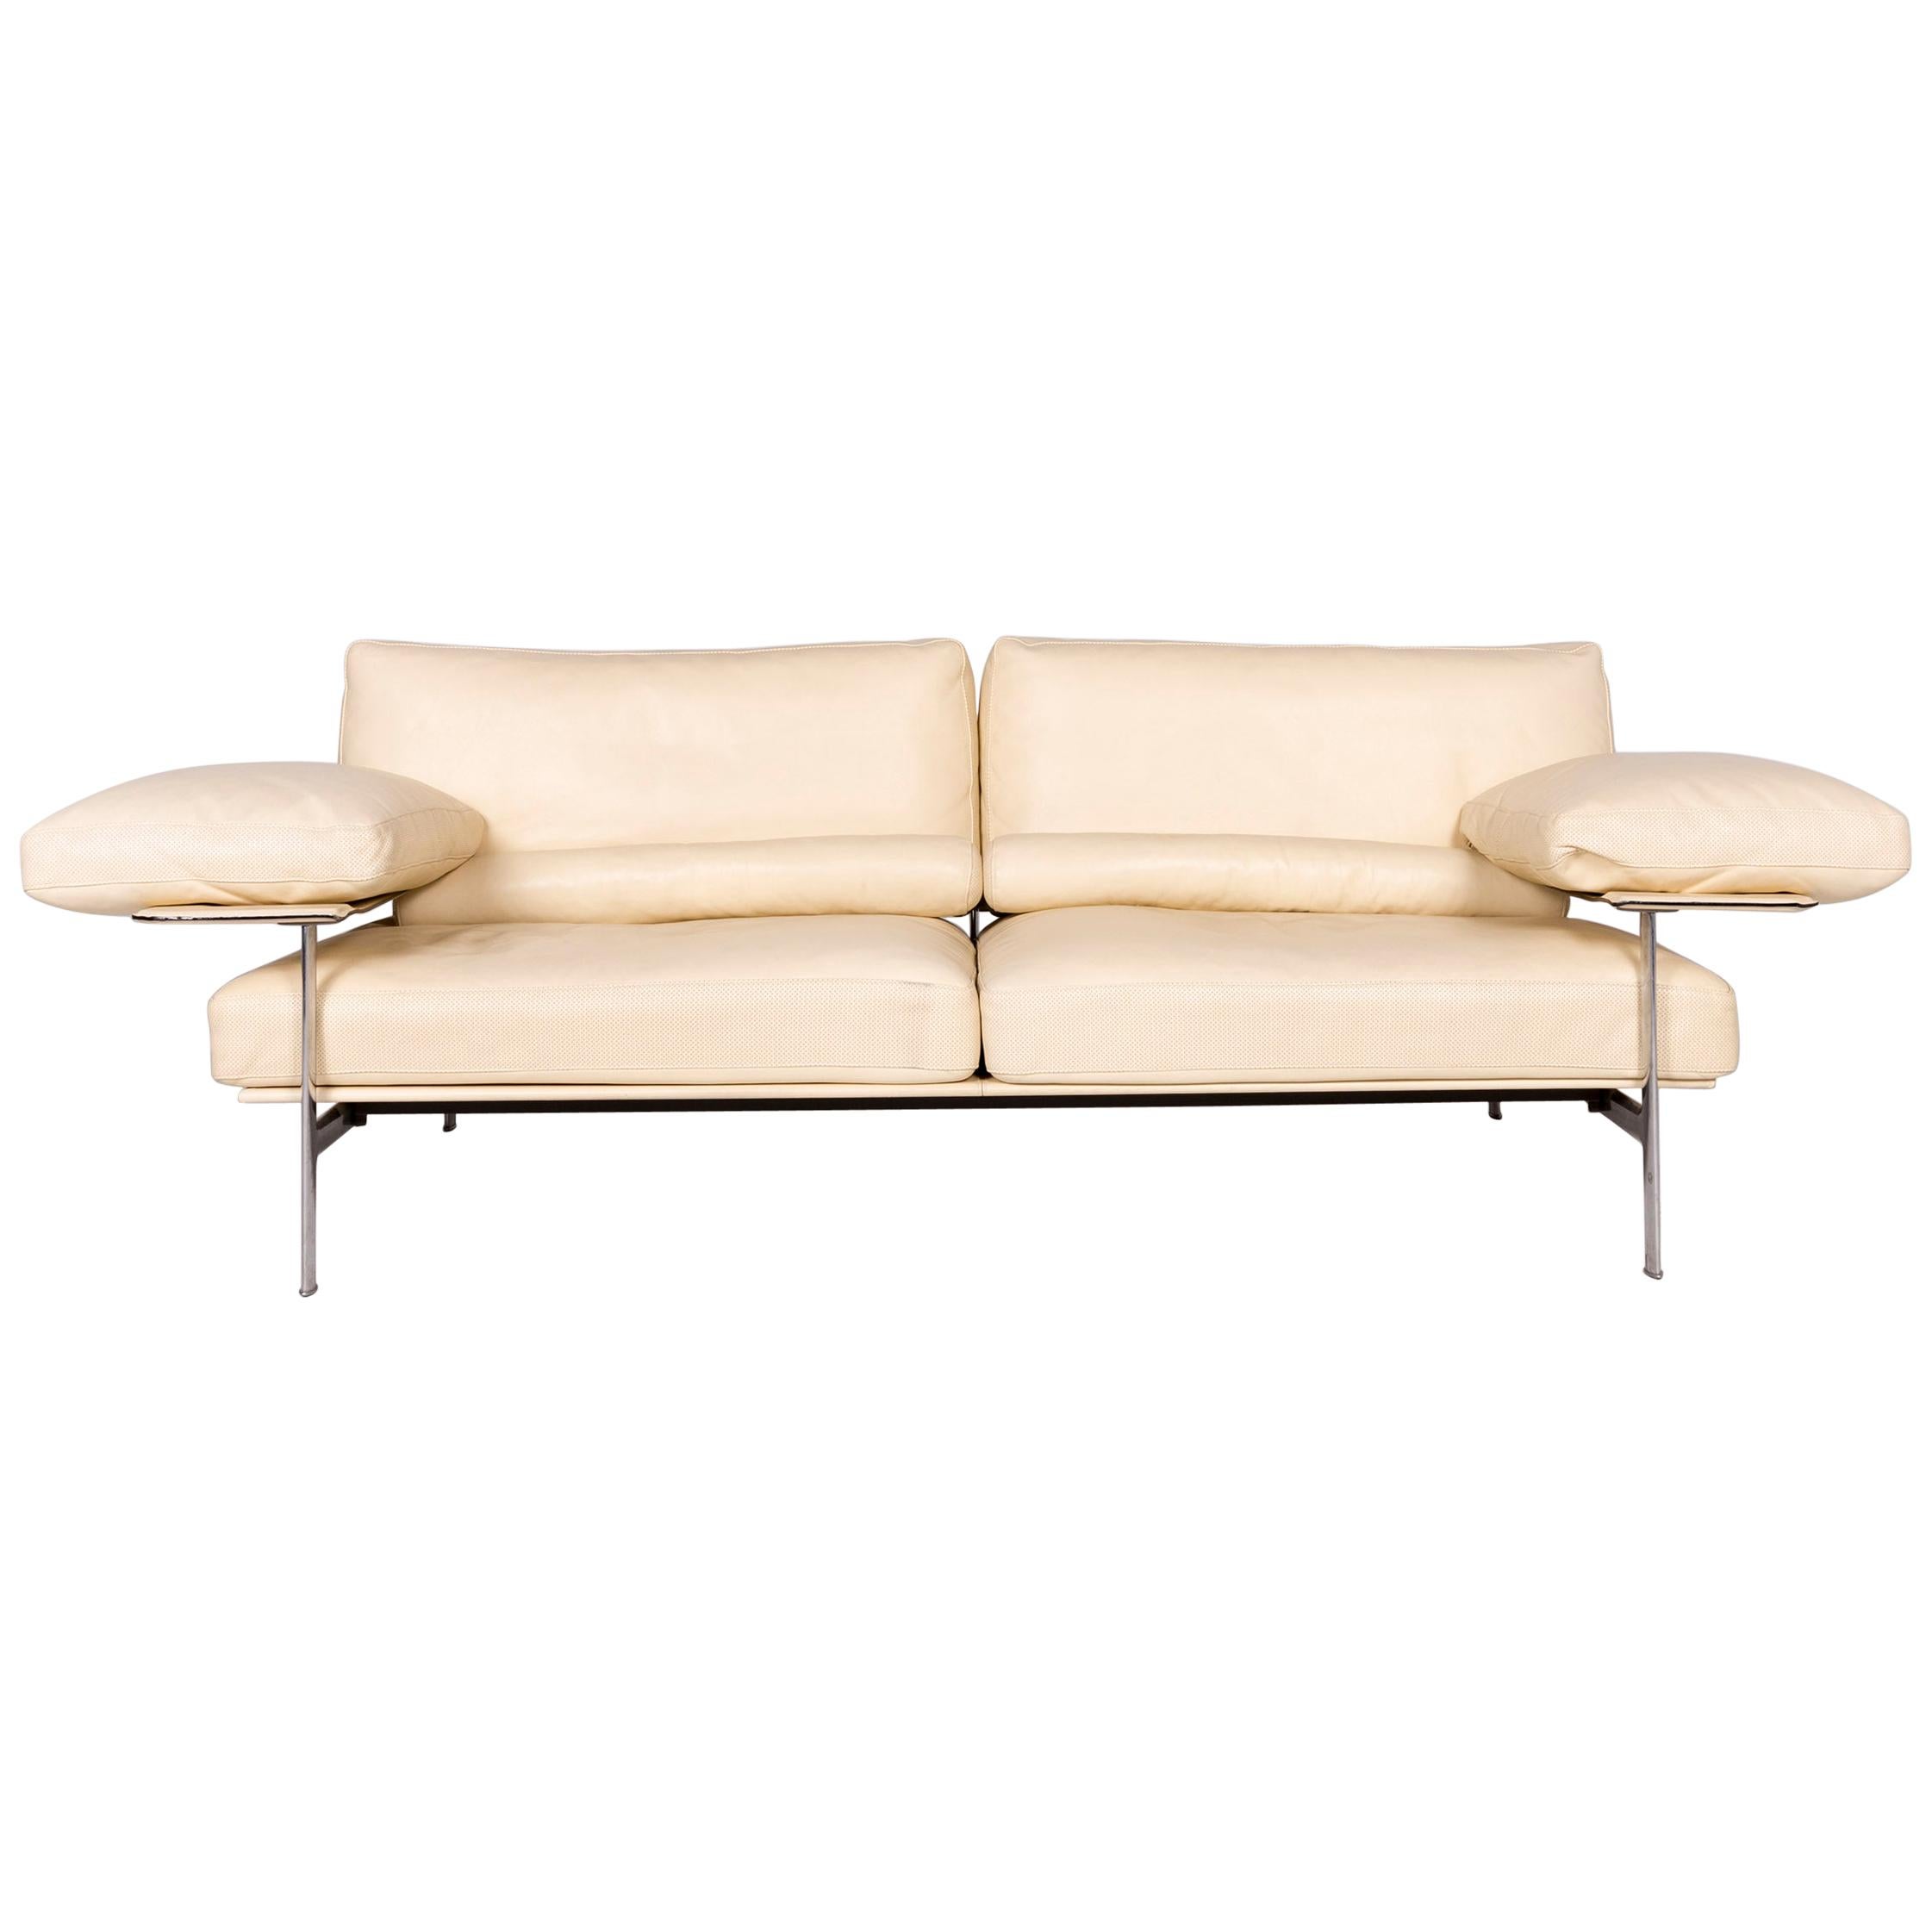 B & B Italia Diesis Designer Leather Sofa Beige Real Leather Three-Seat Couch For Sale